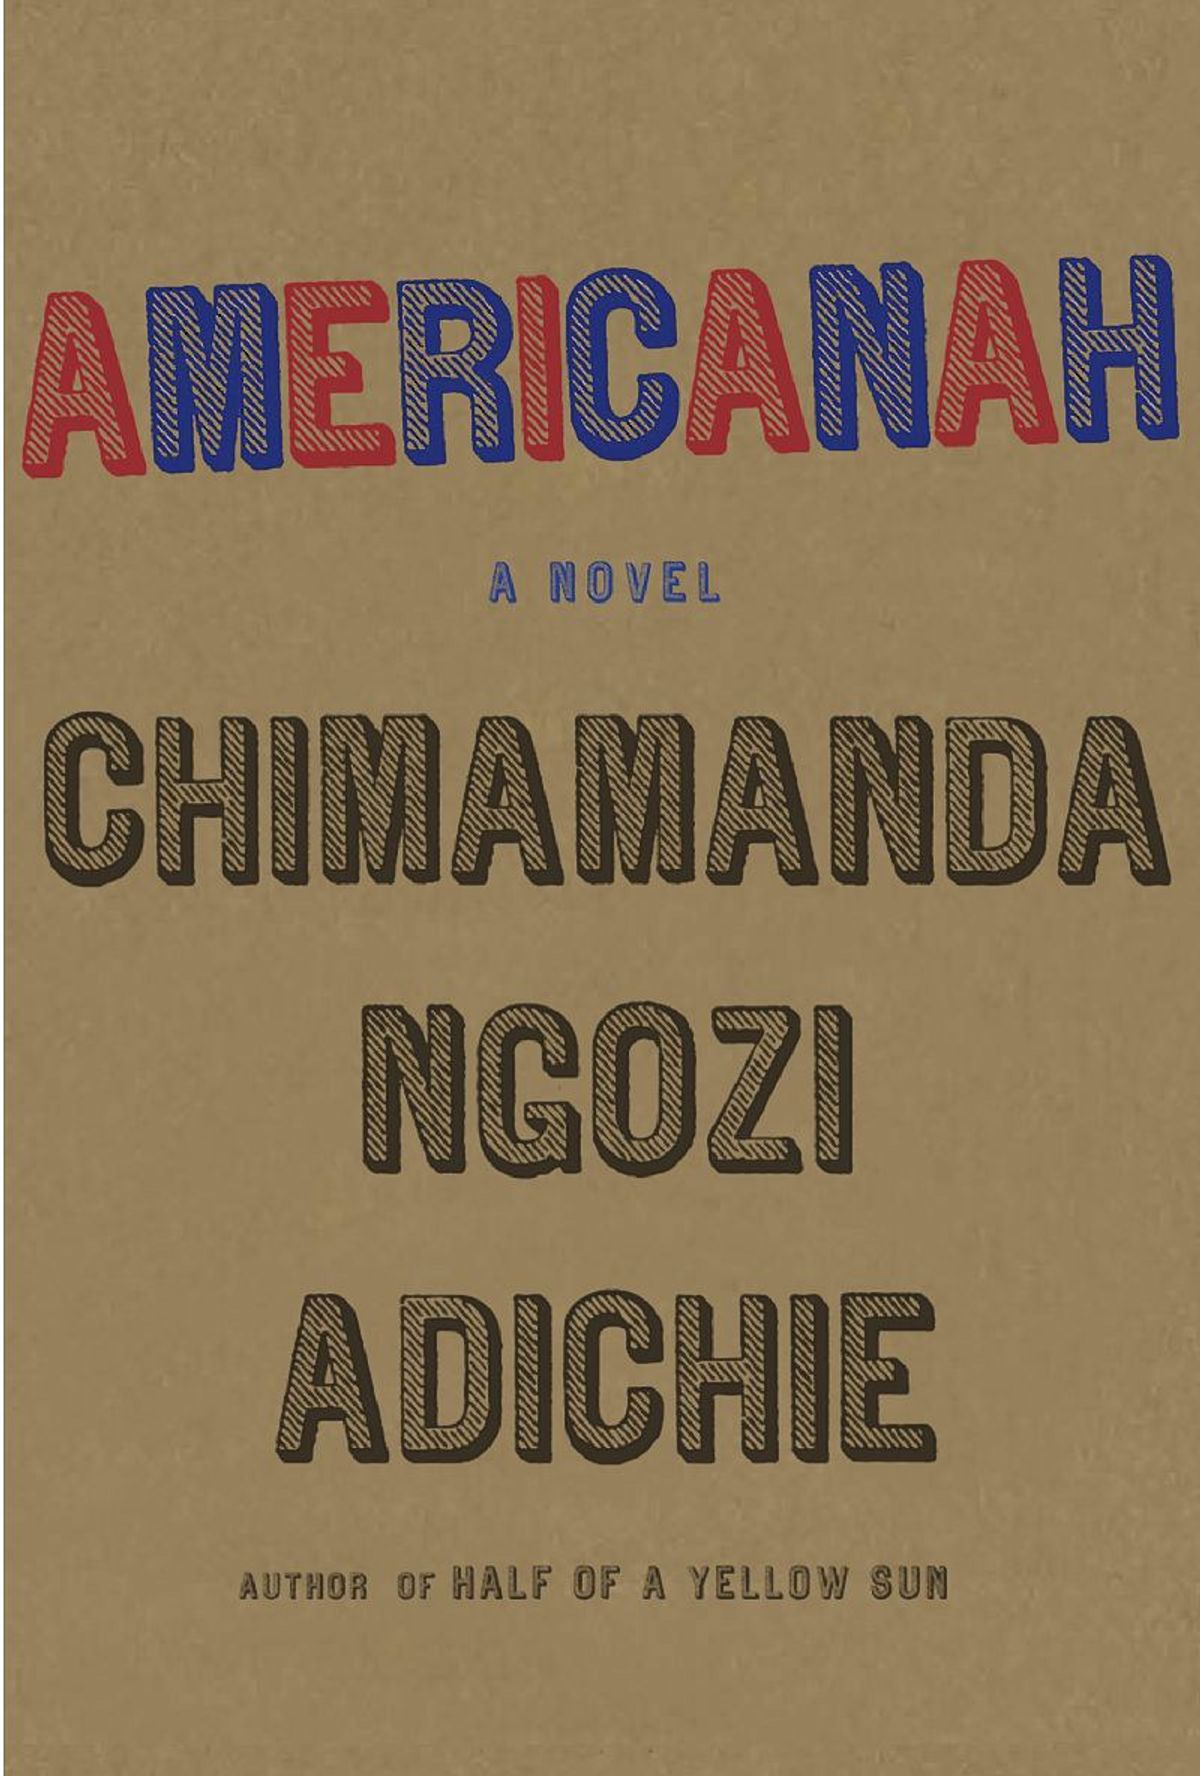 Through The Eyes Of "Americanah," Part 1